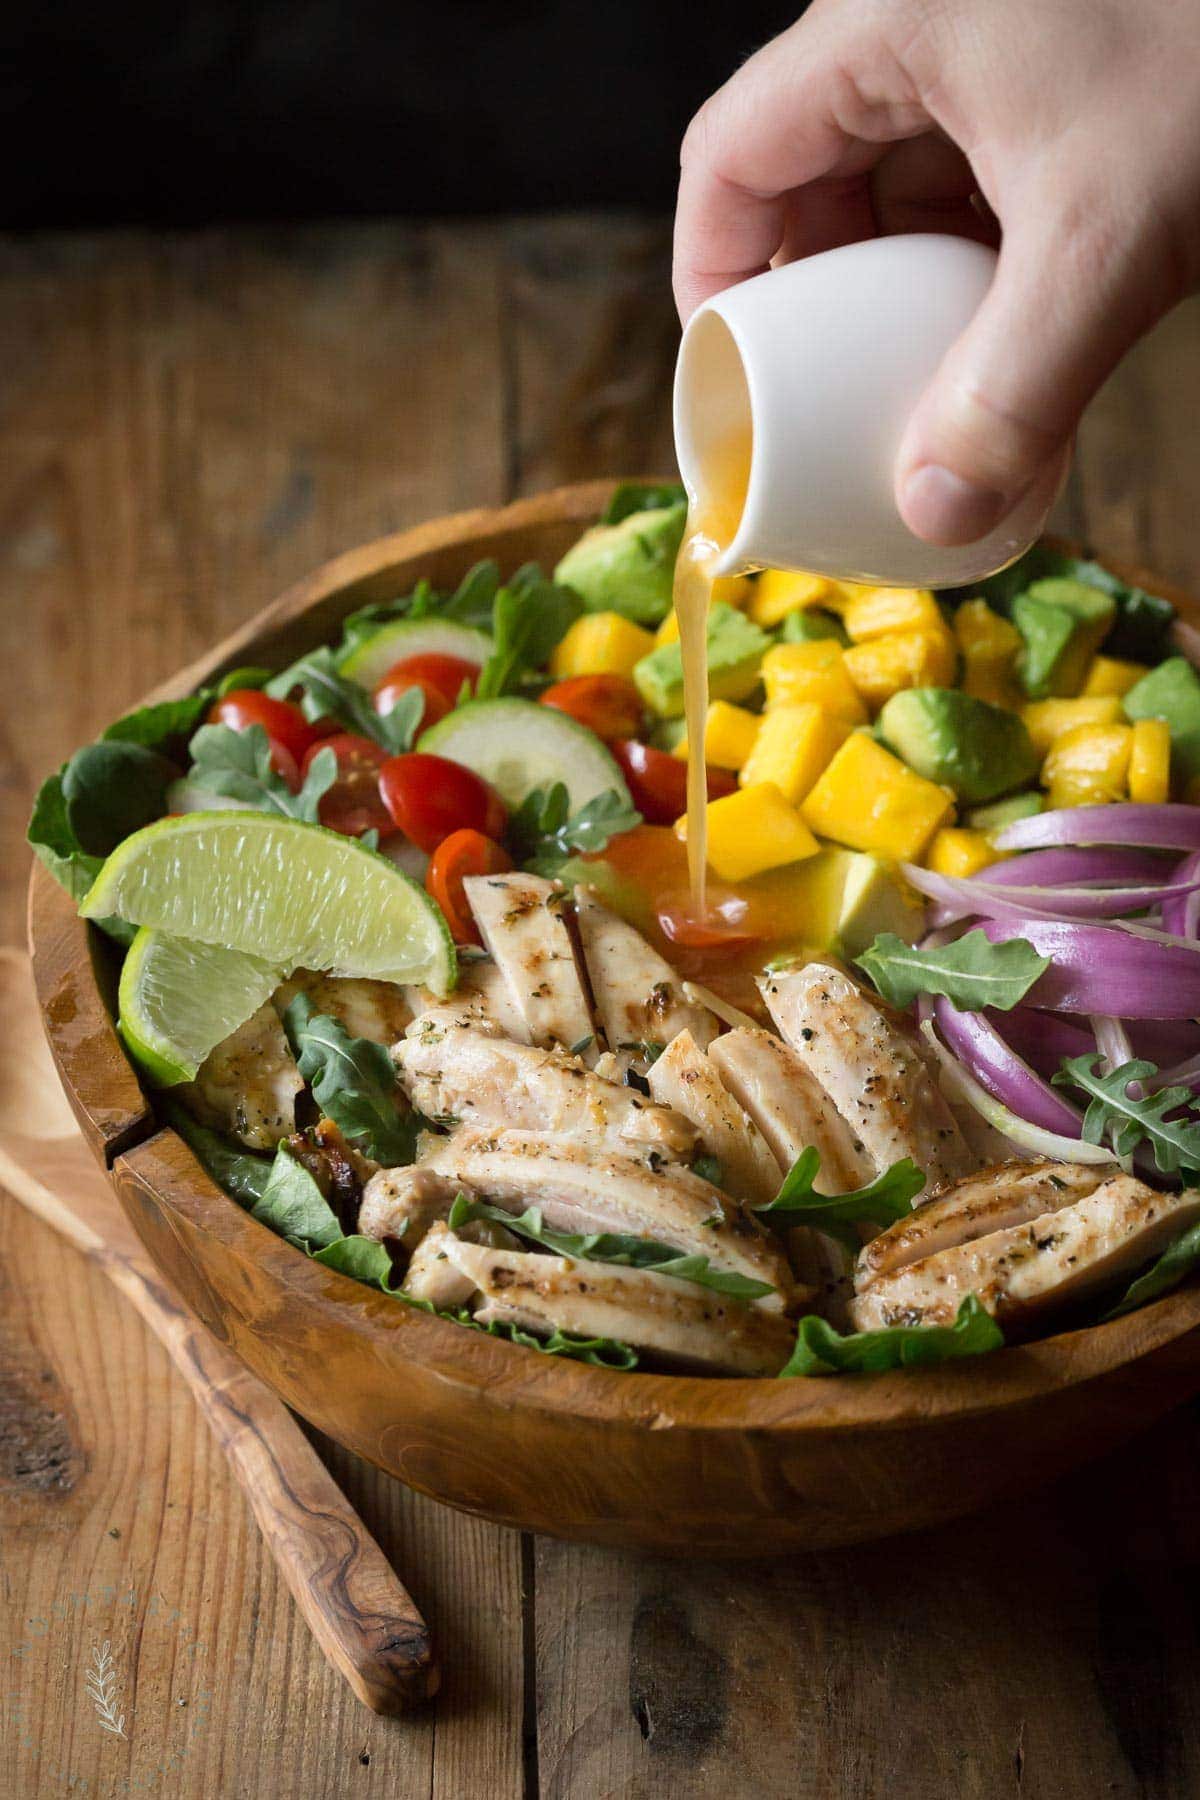 Chicken Avocado Salad with Honey Lime Dressing is such a fun summer salad! It's jam packed with healthy ingredients including arugula, spinach, and mango.| www.noshtastic.com | #chickensalad #chickenavocadosalad #glutenfreesalad #paleo #paleosalad #paleochicken #healthysalad #glutenfree #noshtastic #glutenfreerecipe 